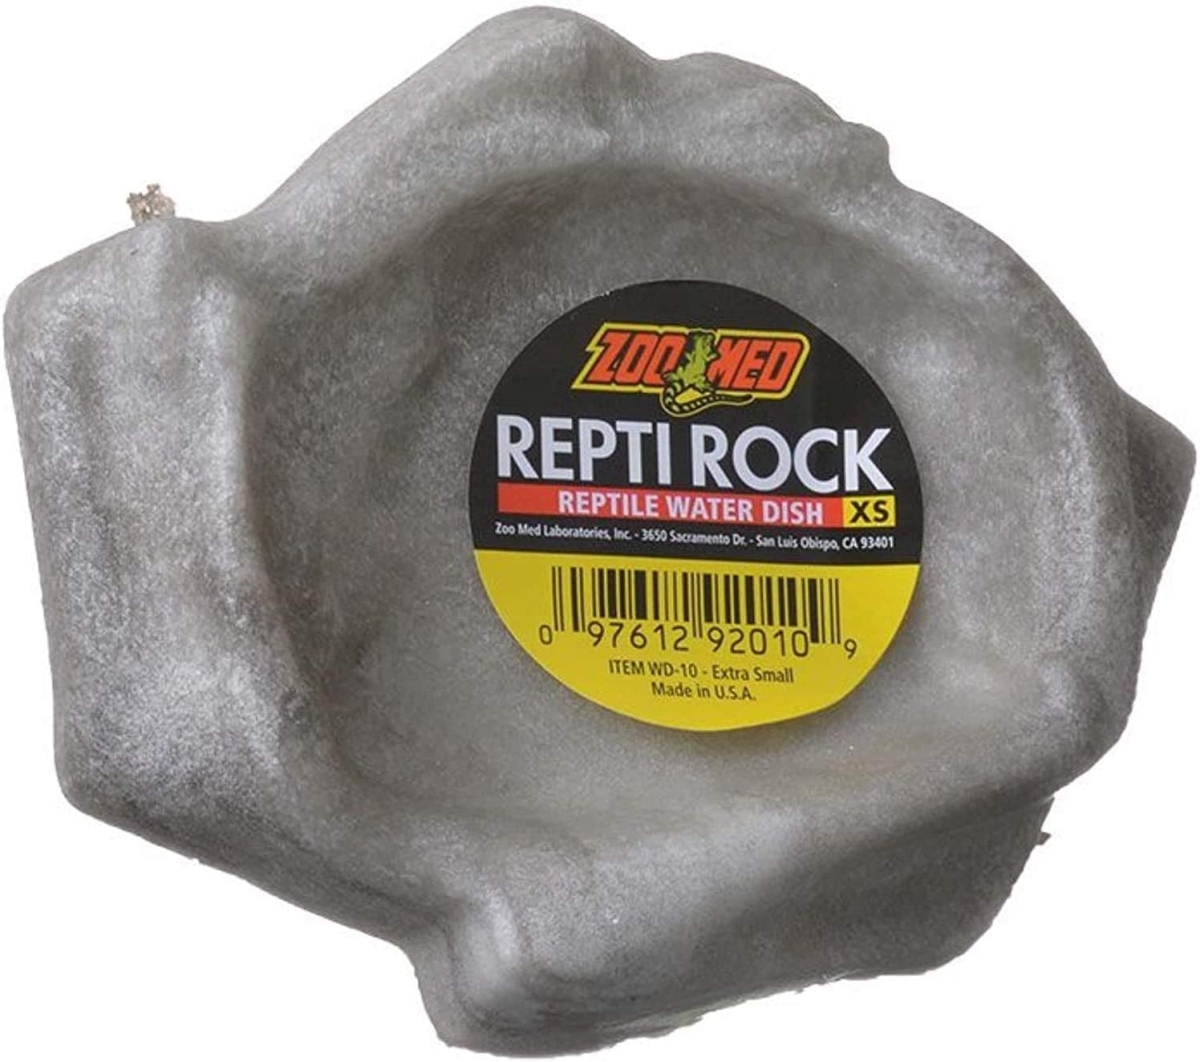 Picture of Zoo Med ZM92010P Repti Rock Reptile Water Dish